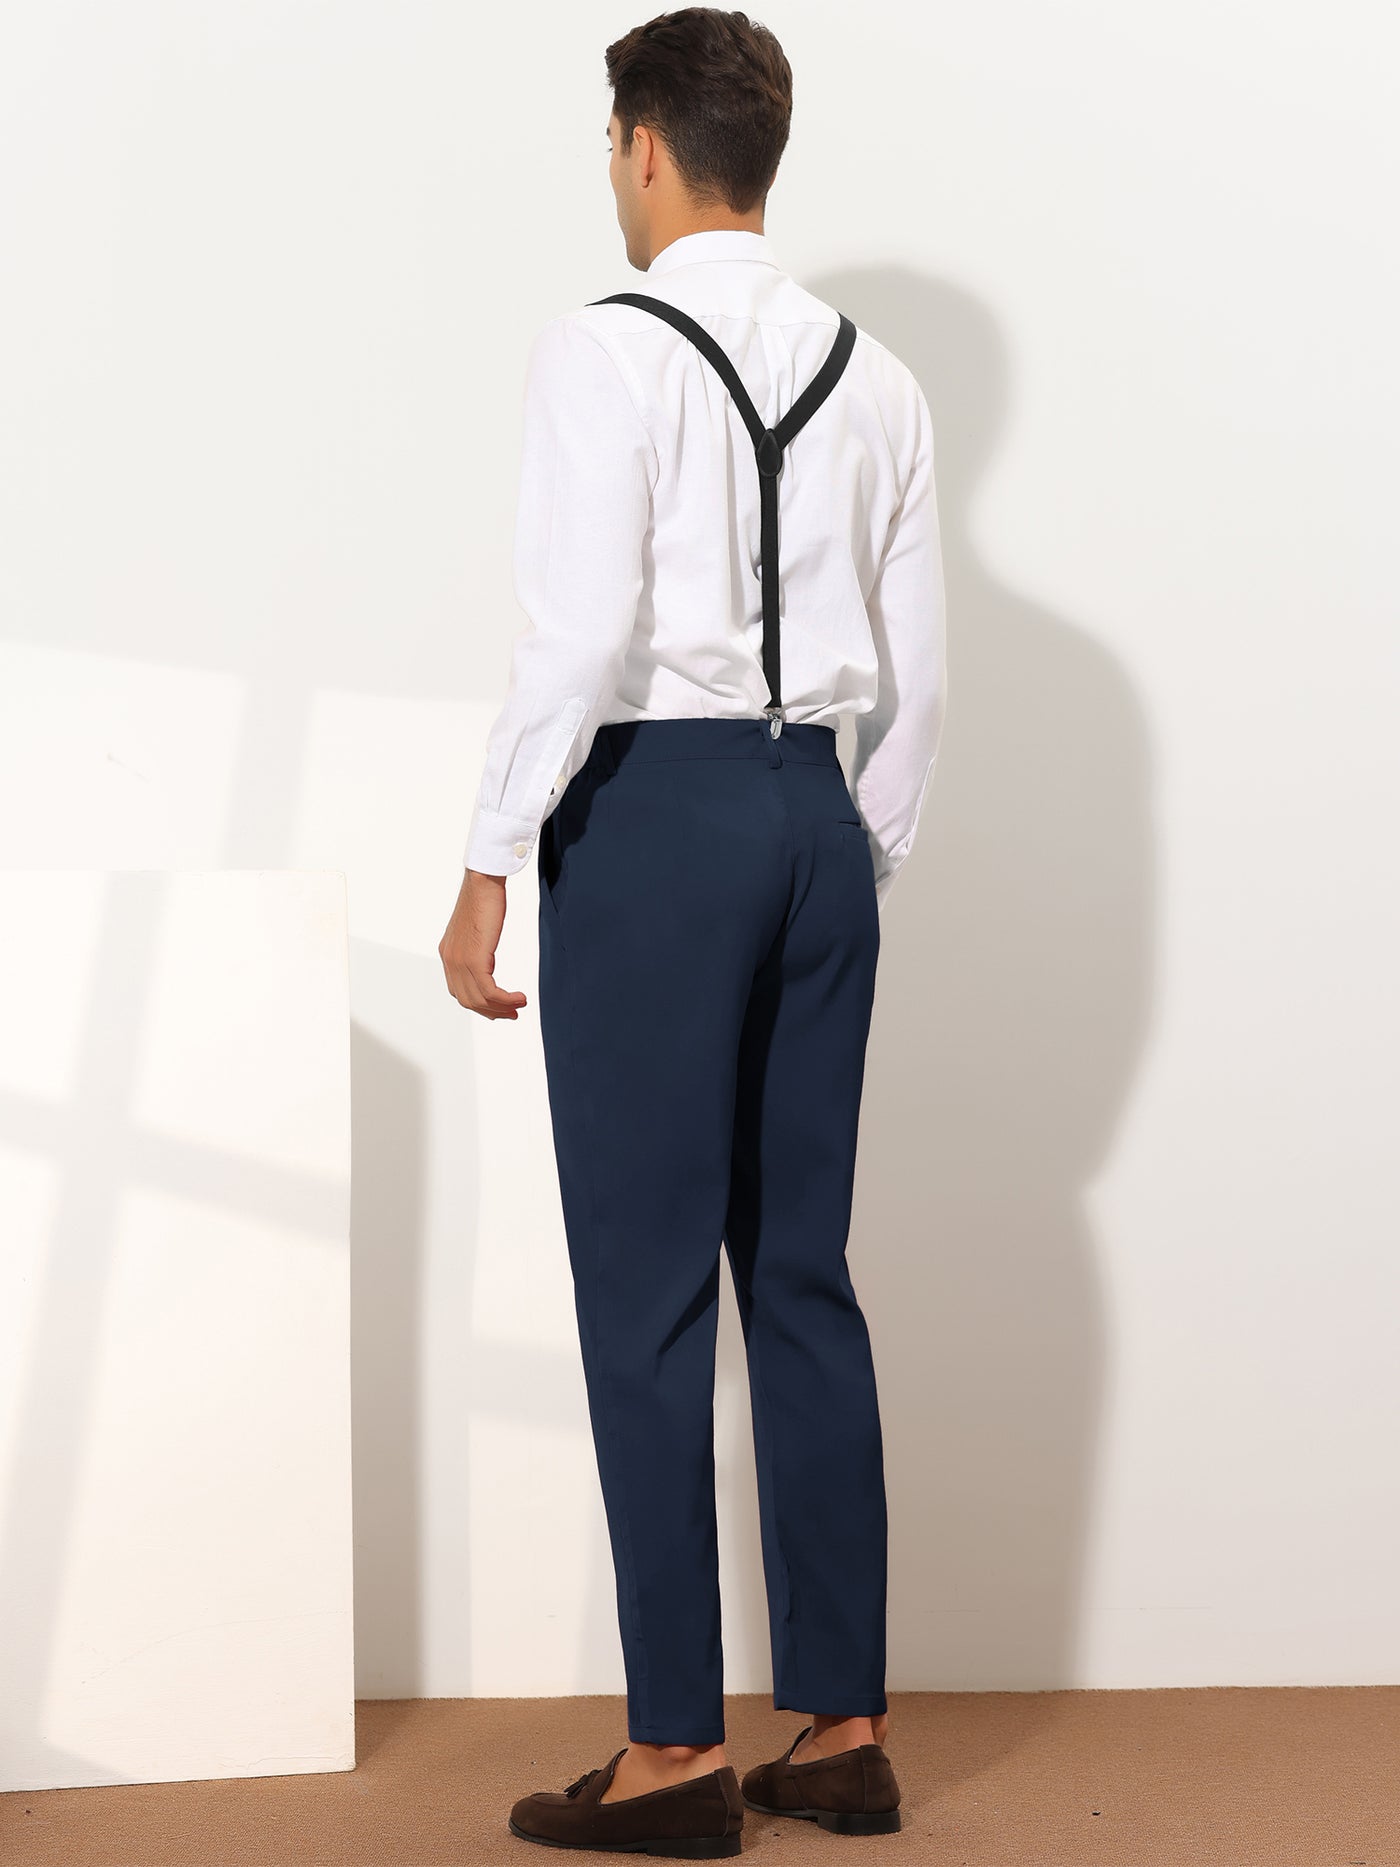 Bublédon Men's Cropped Flat Front Casual Solid Tapered Suspender Pants